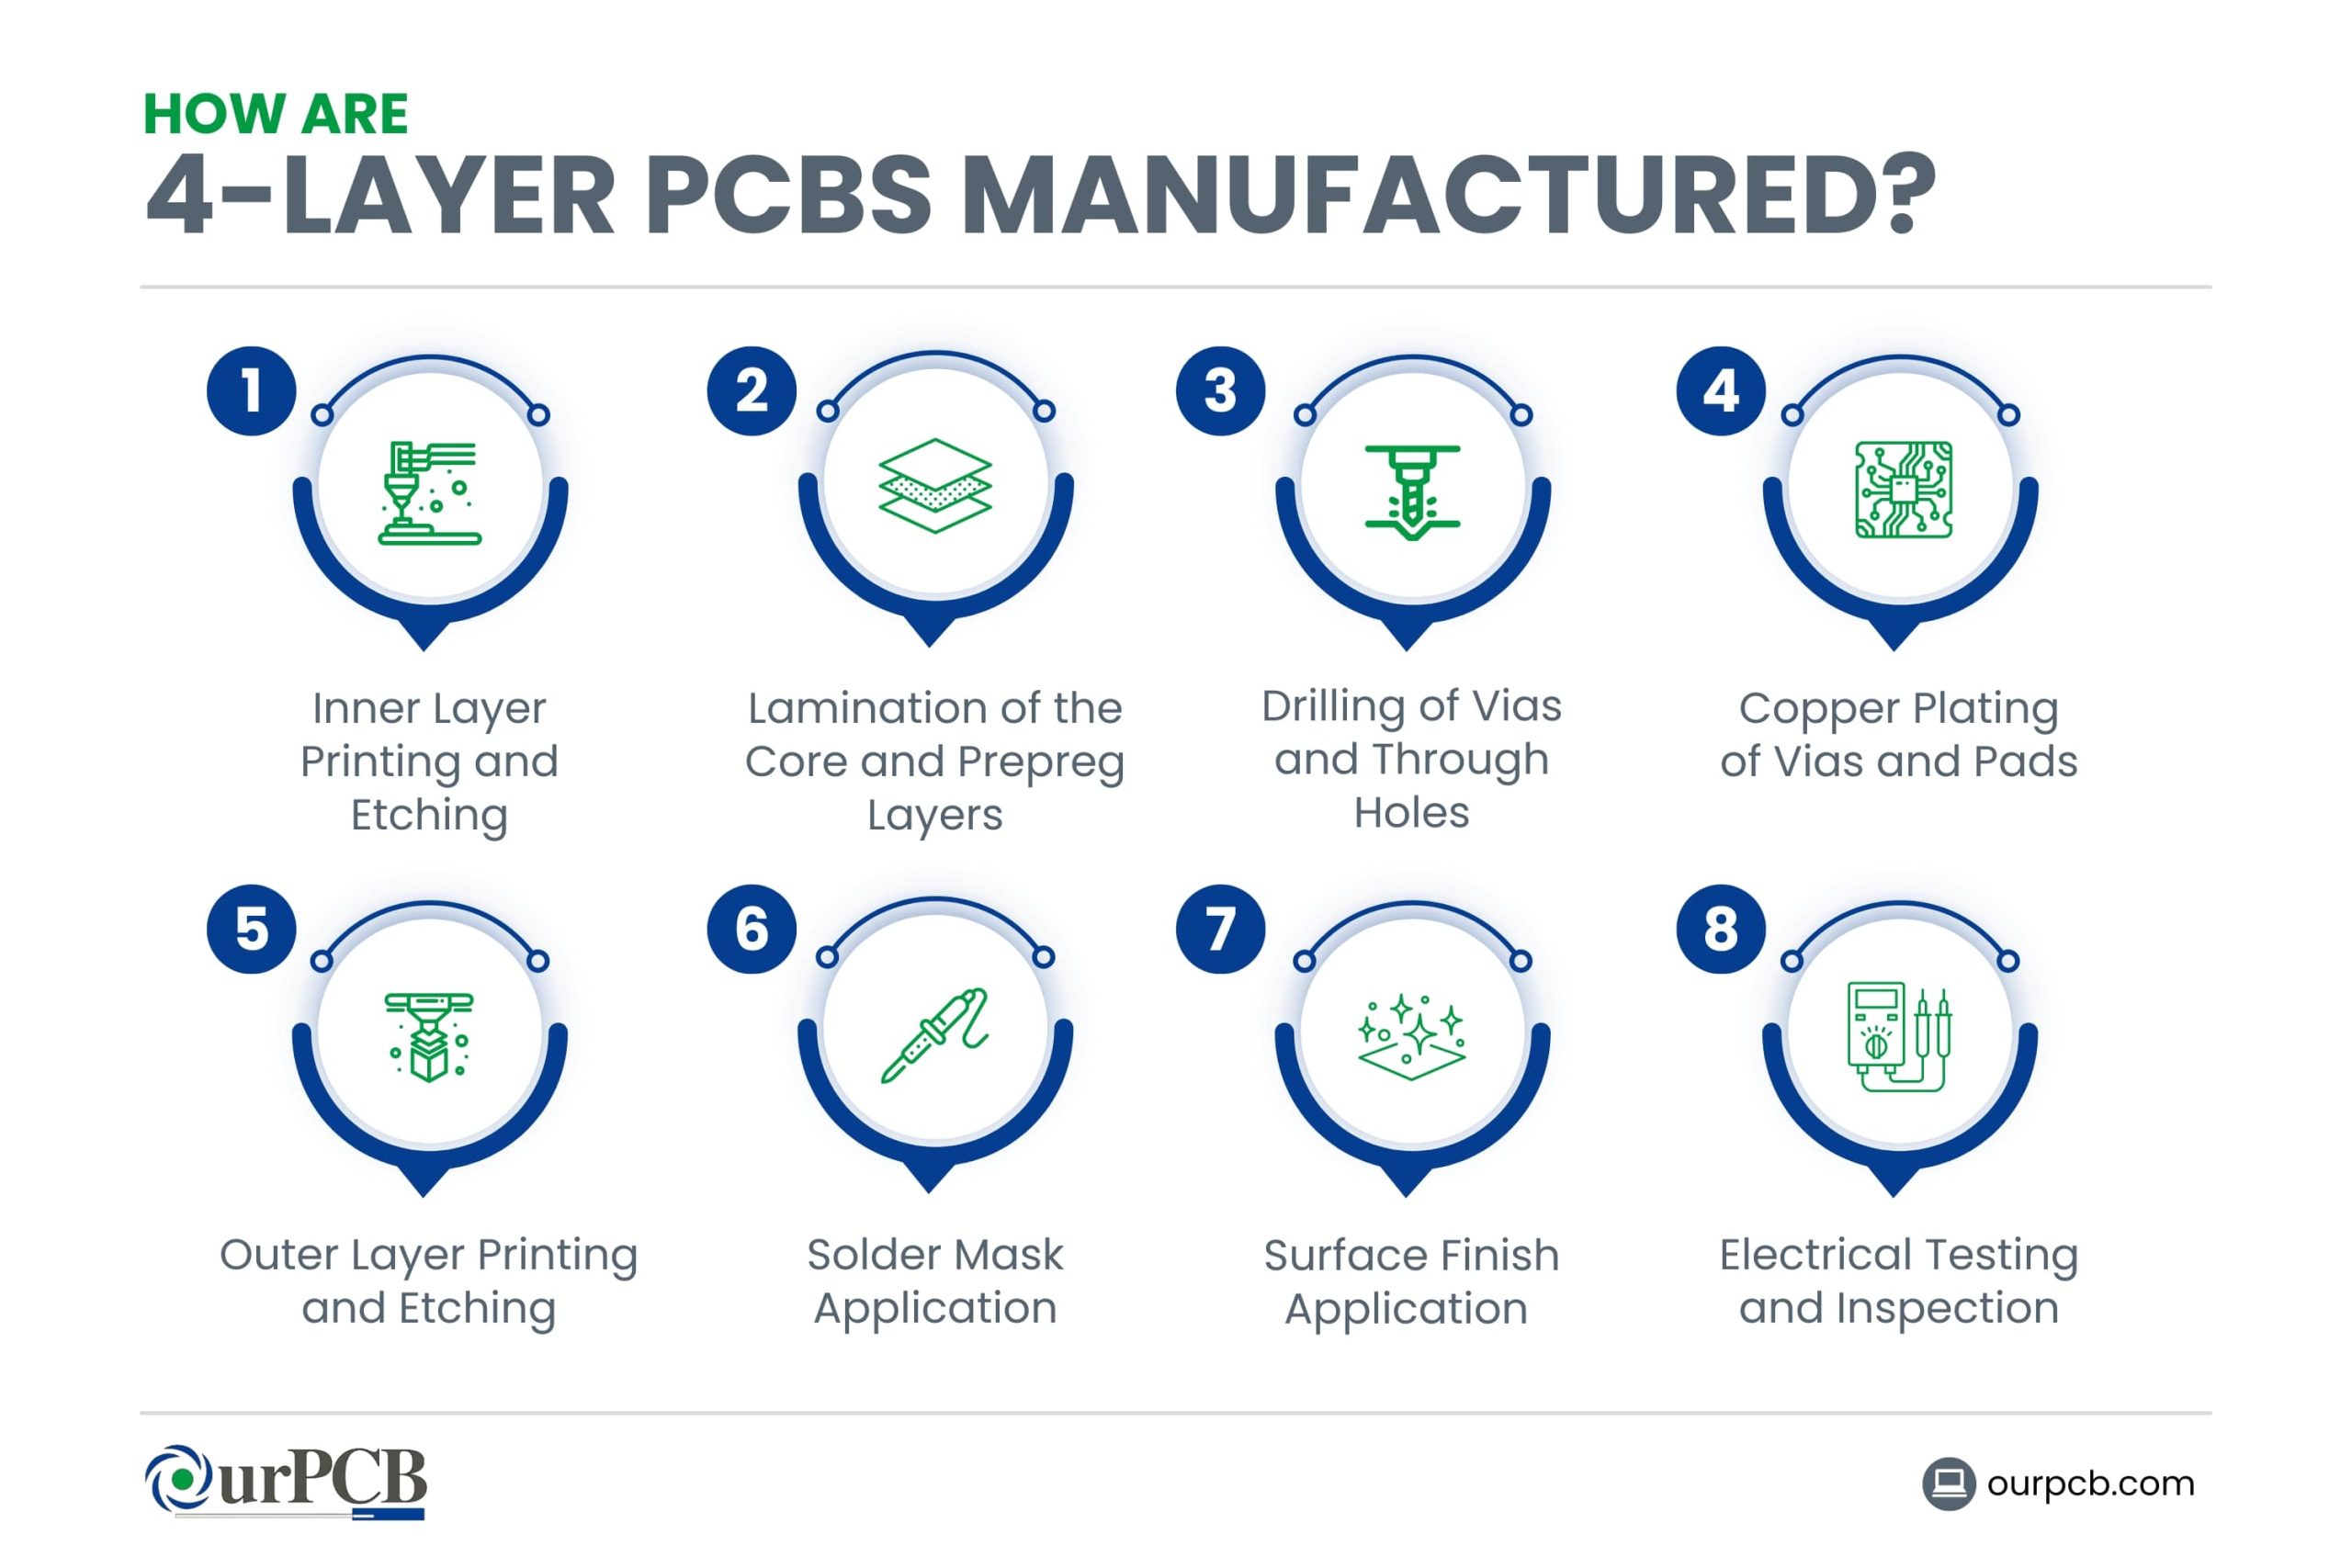 How Are 4-Layer PCBs Manufactured?